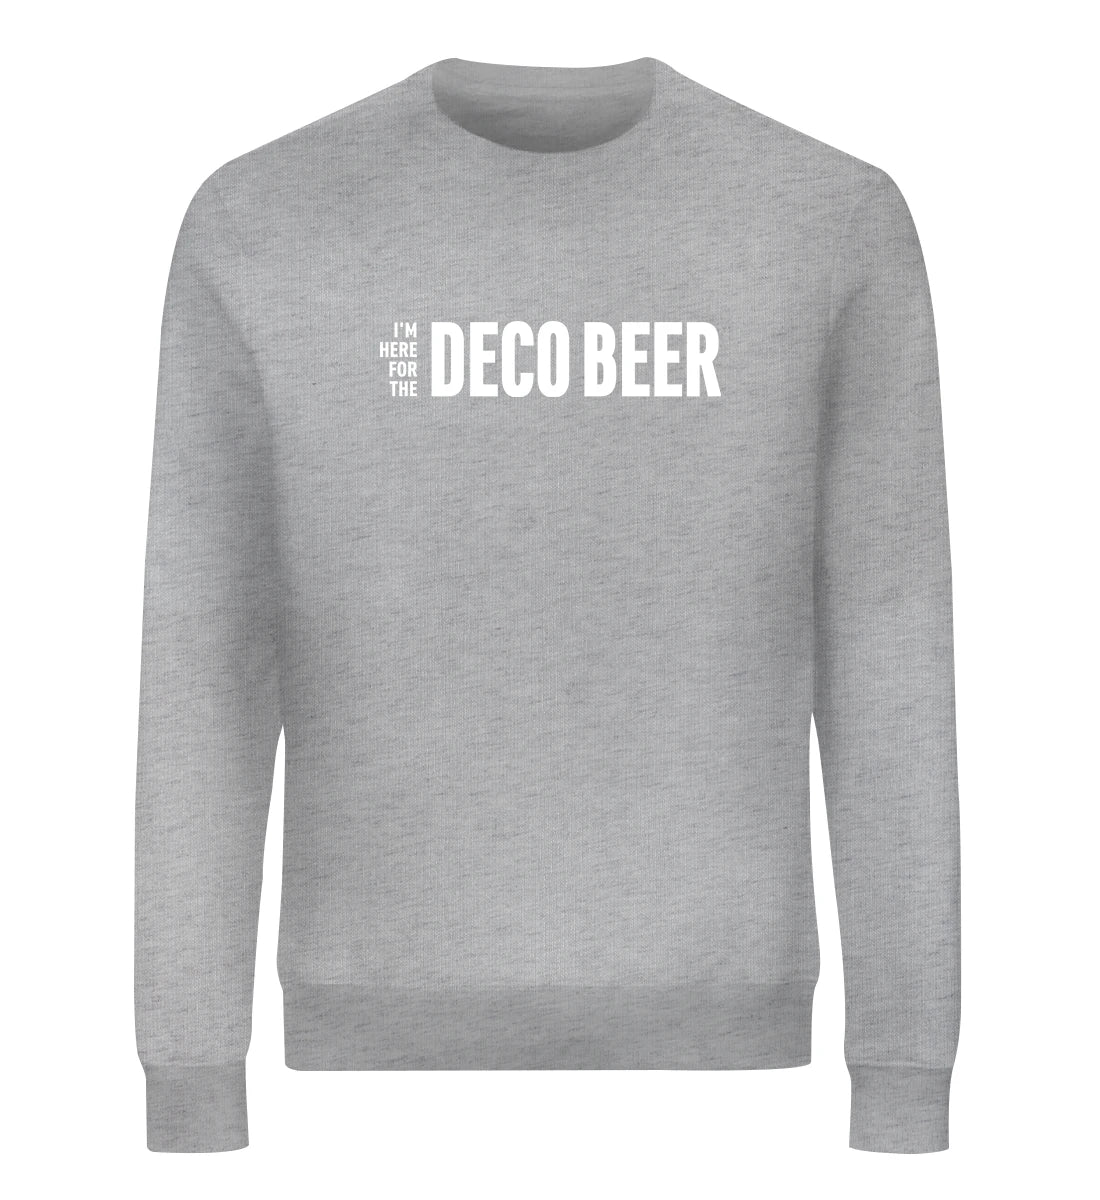 I'm here for the Deco Beer - Bio Sweater